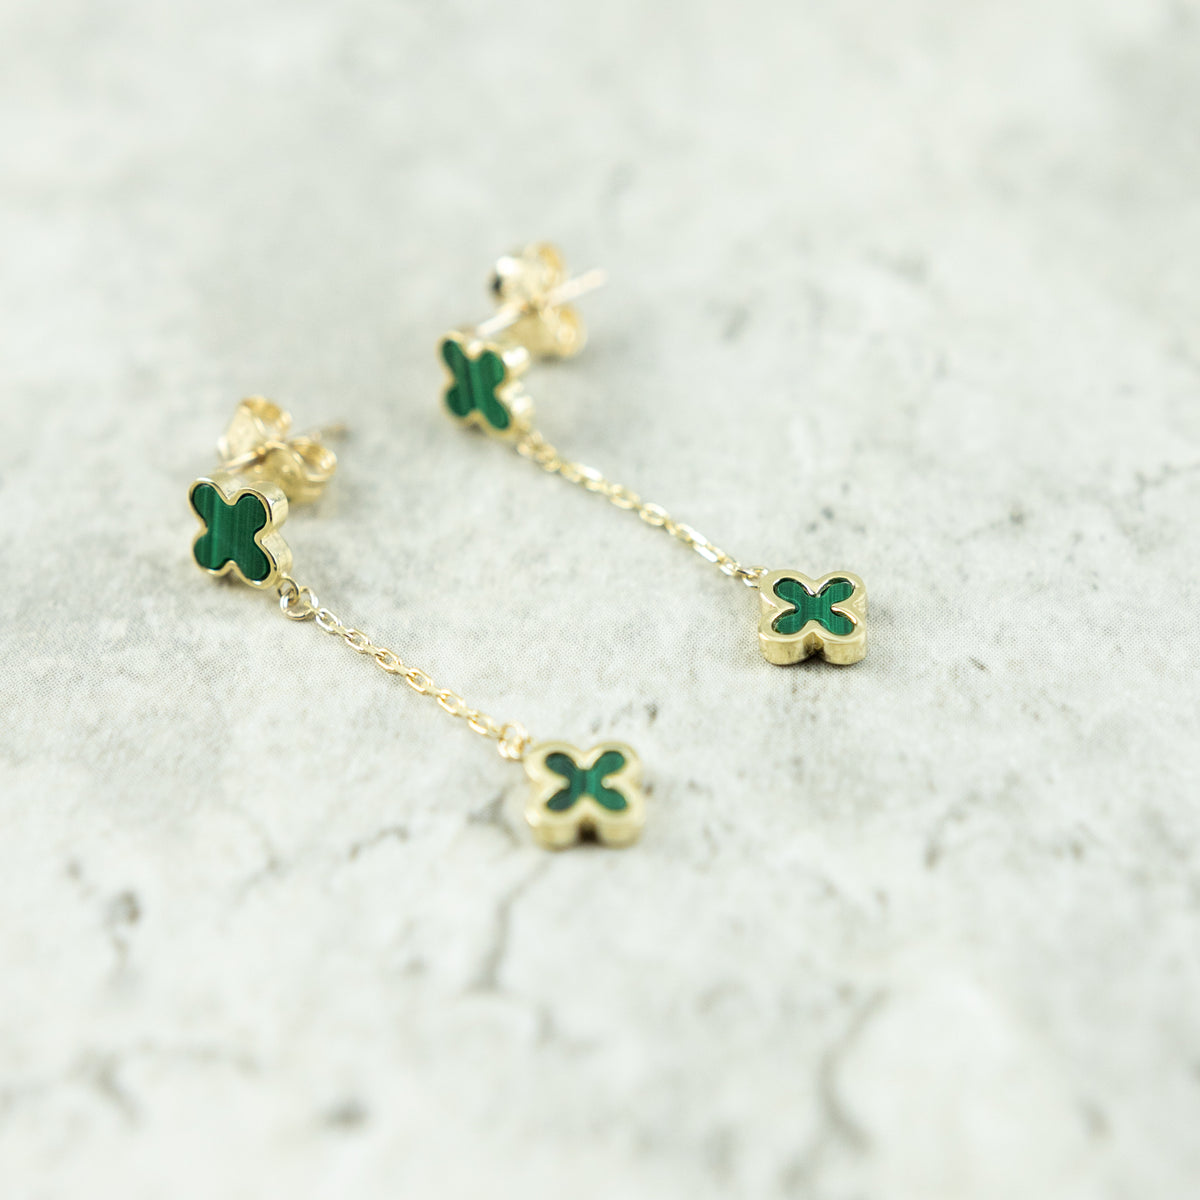 Designer Inspired 9ct Yellow Gold 2 Malachite Petal Earrings Available at RR Jewellers Yarm UK